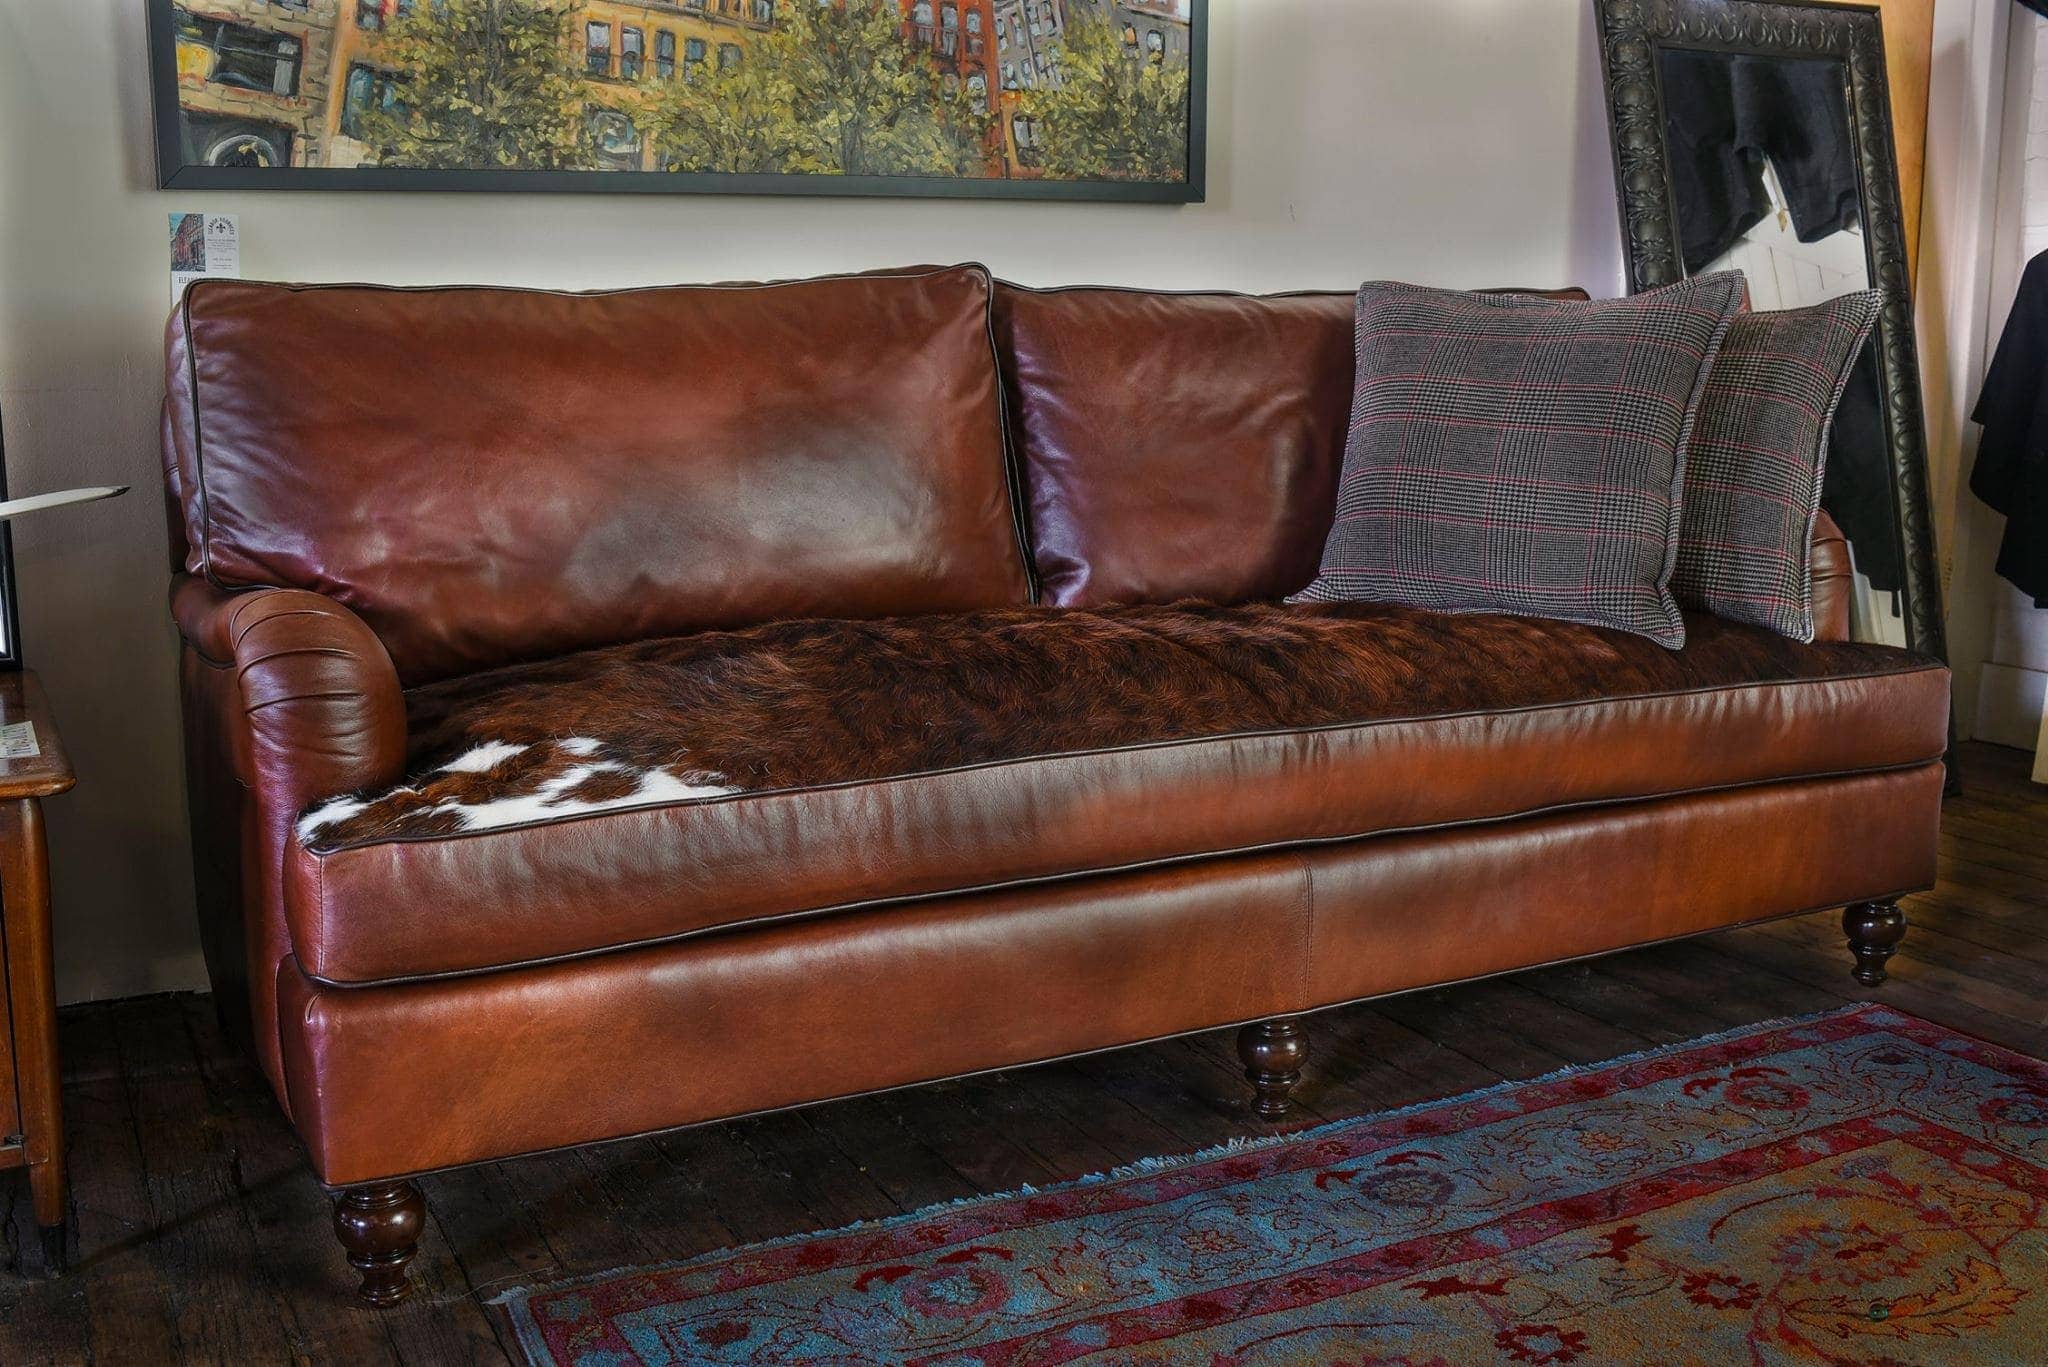 The Hitchcock English Roll Arm Sofa in Brompton Brown Leather and Real Hair-on-Hide Bench Cushion